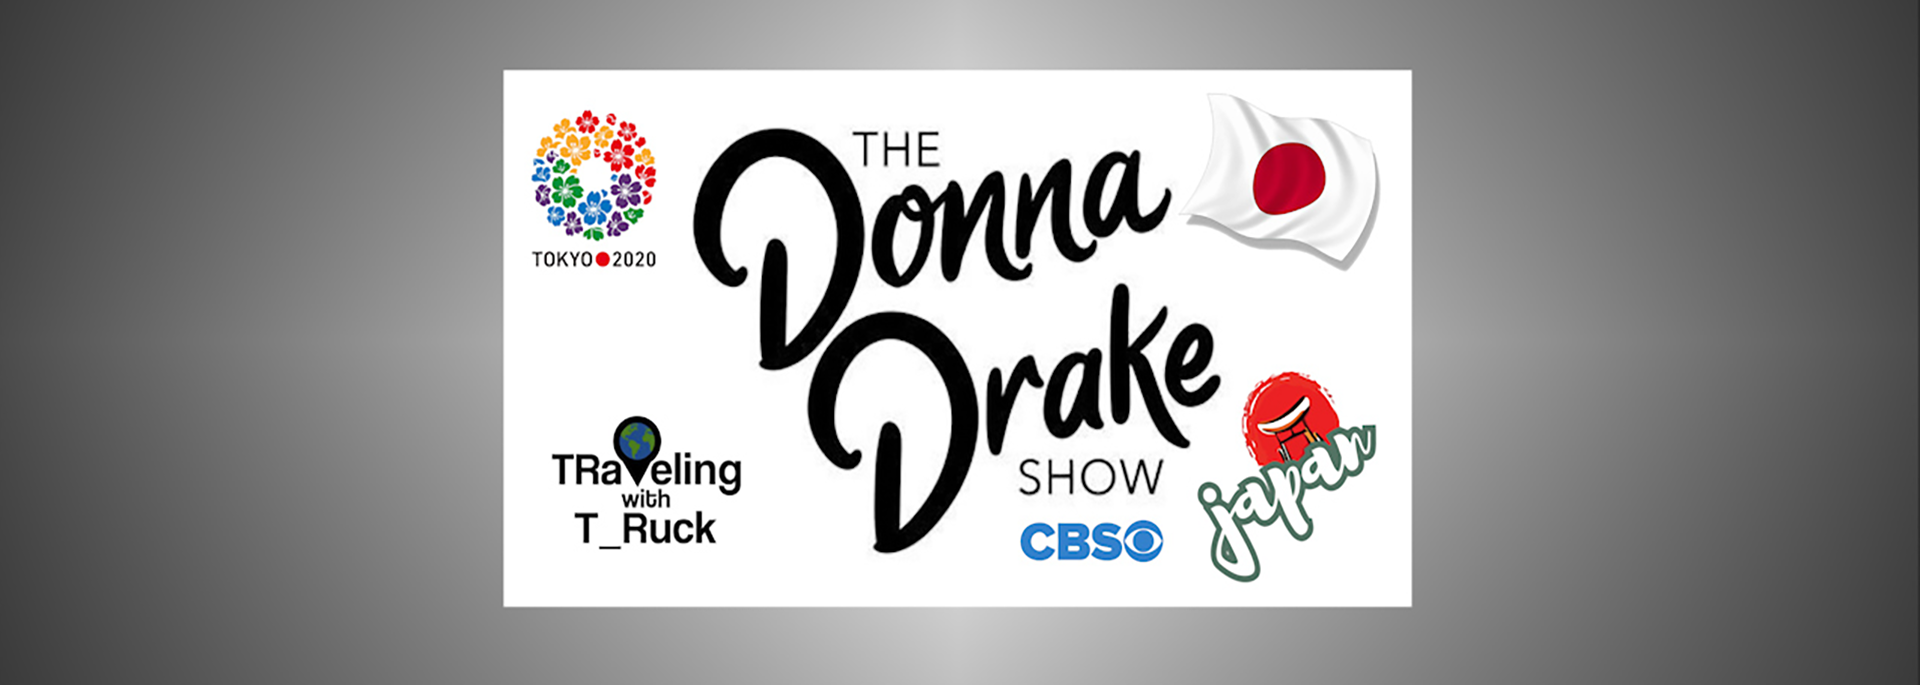 The Donna Drake Show In Japan! (CBS) channel